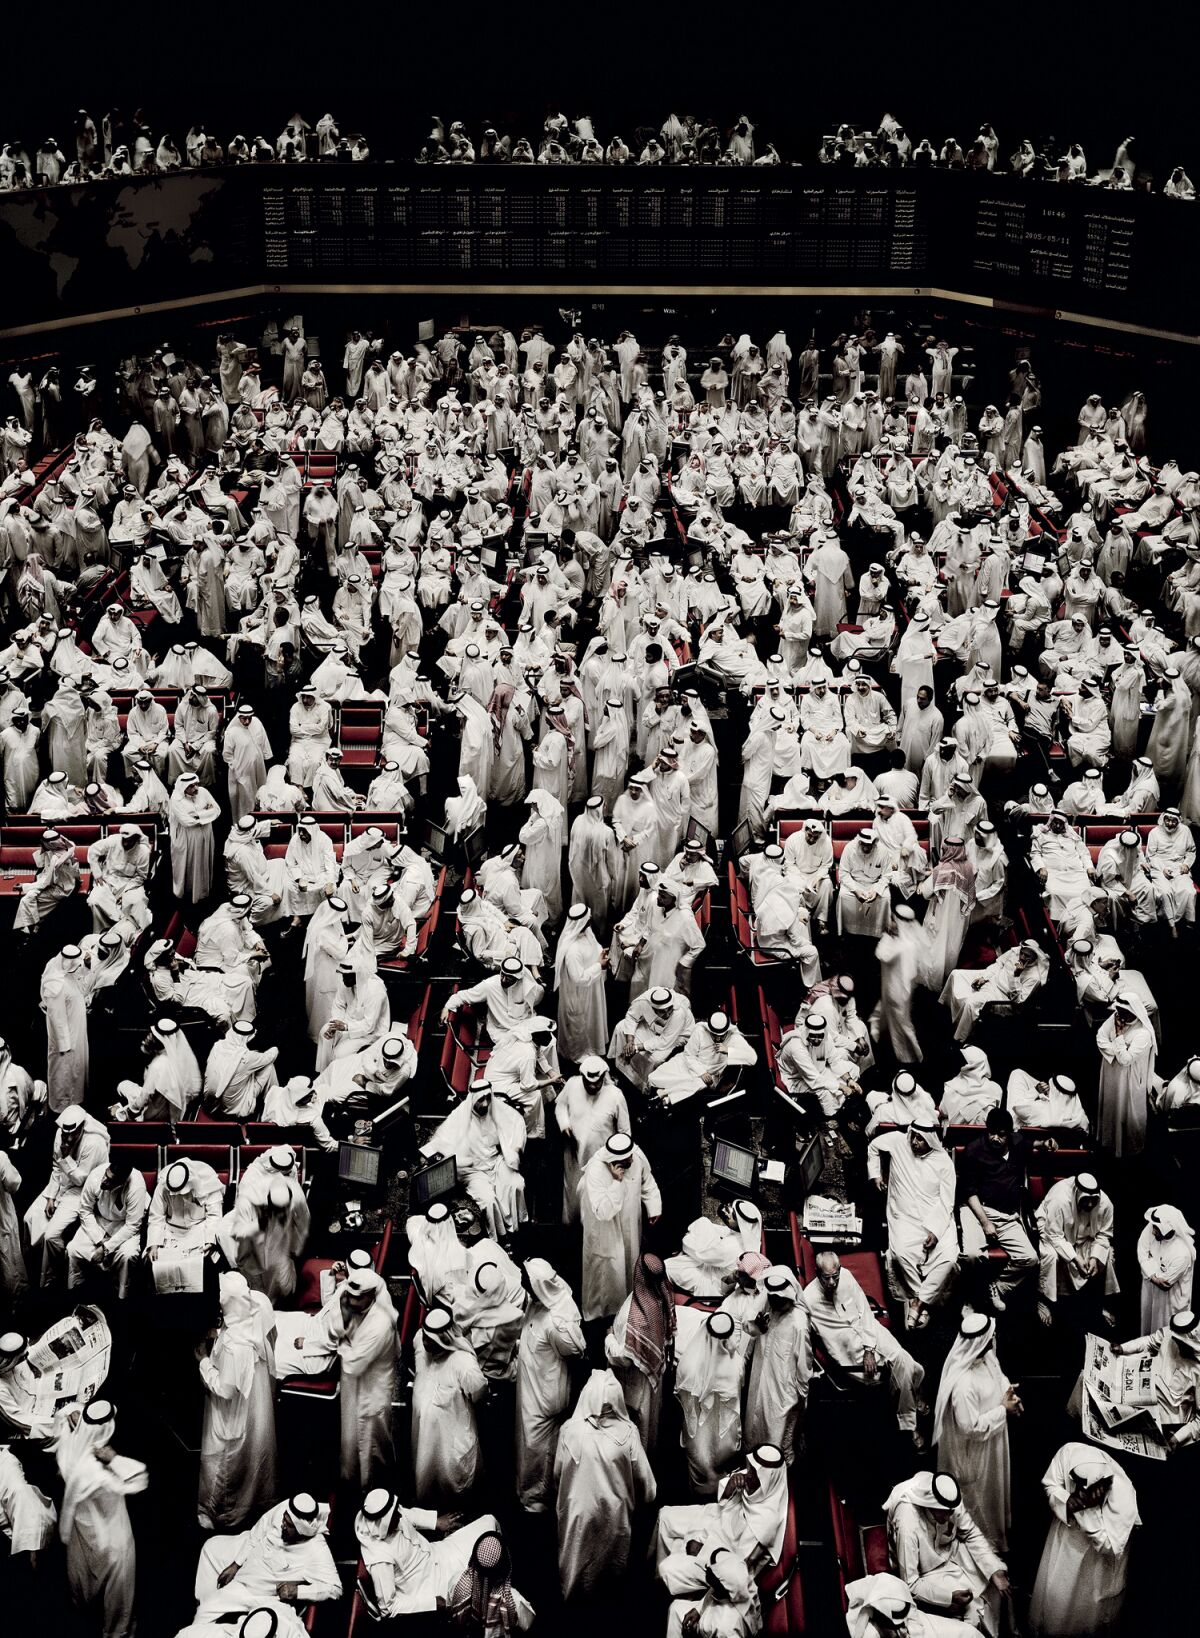 "Kuwait Stock Exchange I, 2007" by Andreas Gursky.